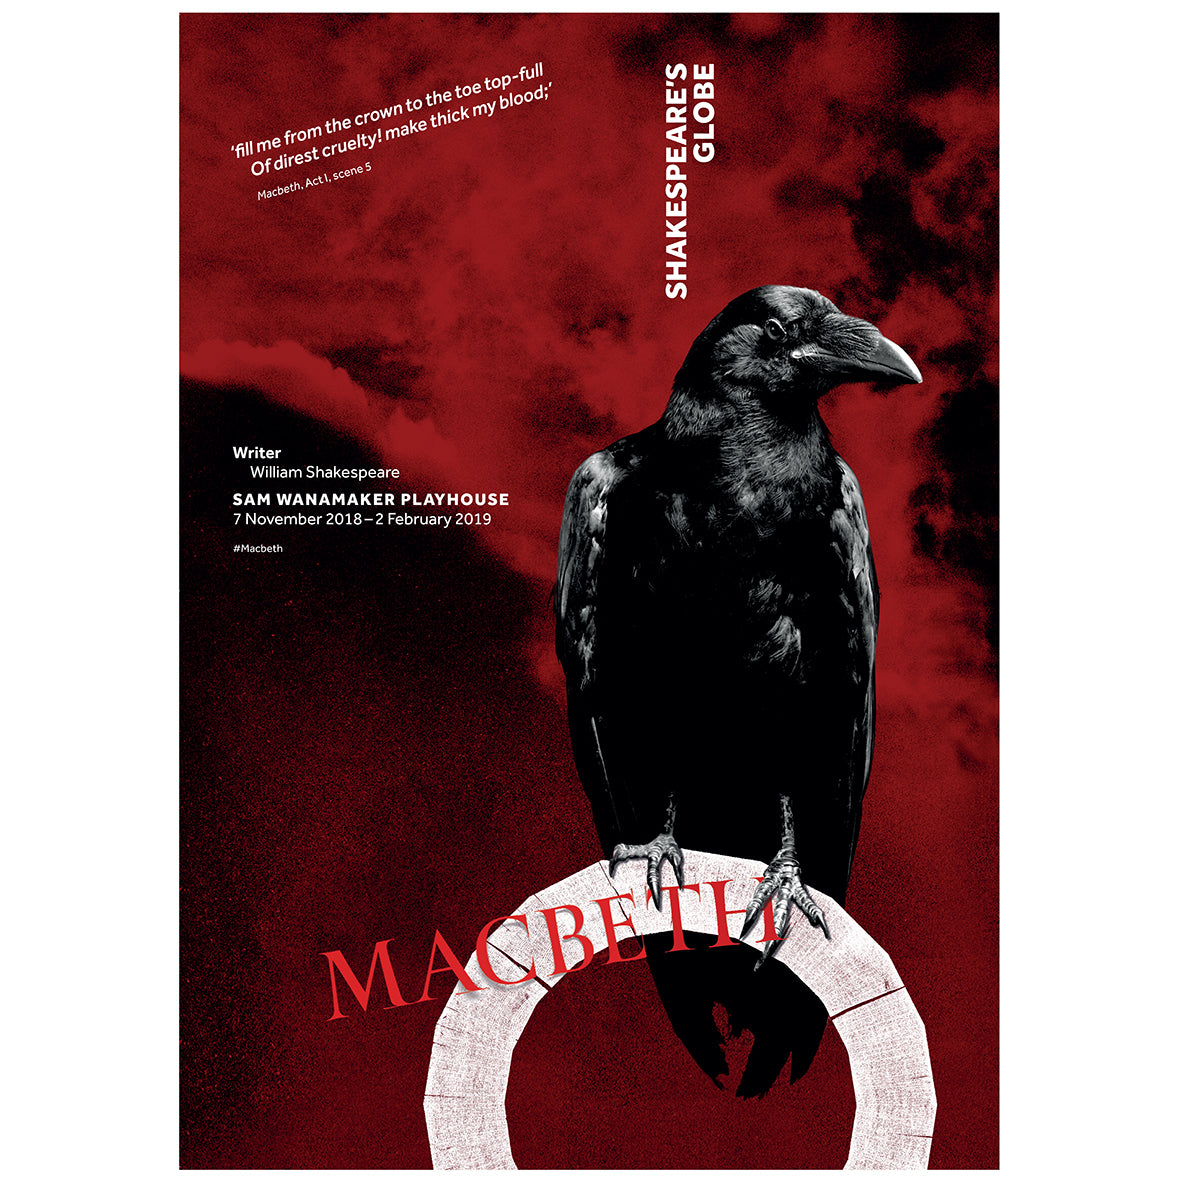 Poster celebrating the 2018/19 production of Macbeth in the Sam Wanamaker Playhouse at Shakespeare's Globe. The background is deep red with red smoke, in the foreground a black raven perches on a white Globe logo.